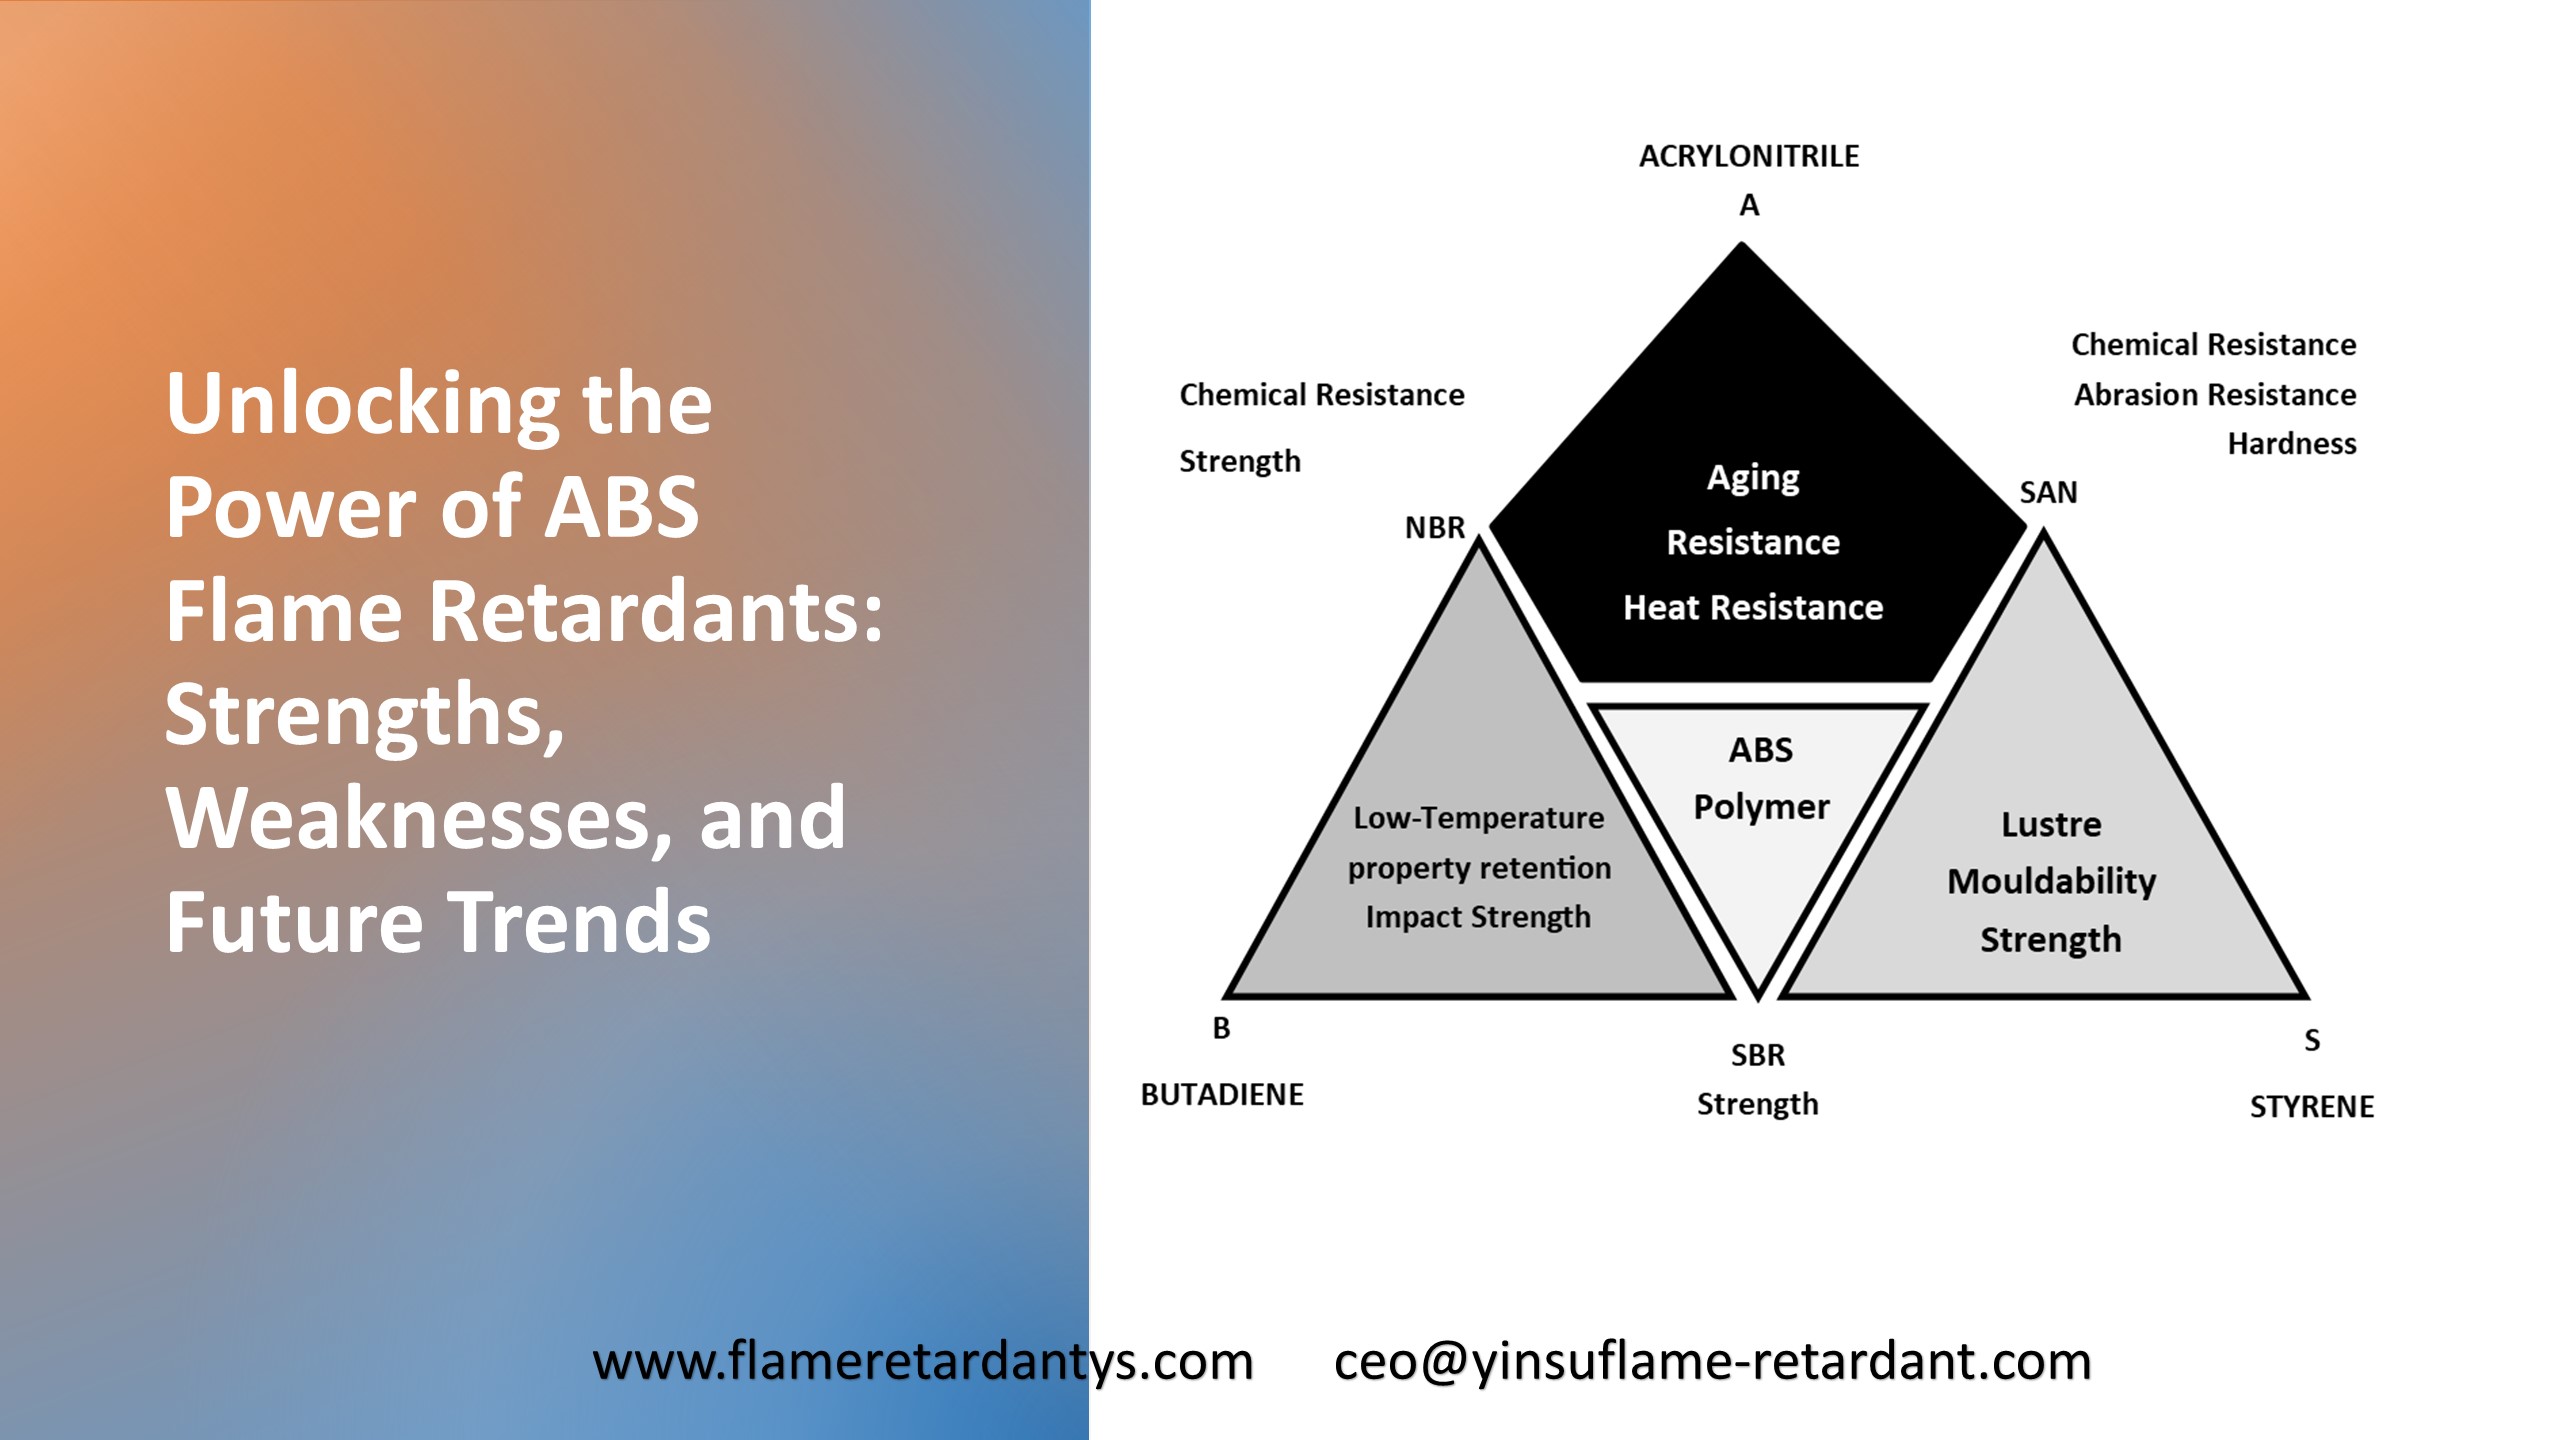 Unlocking The Power of ABS Flame Retardants: Strengths, Weaknesses, And Future Trends